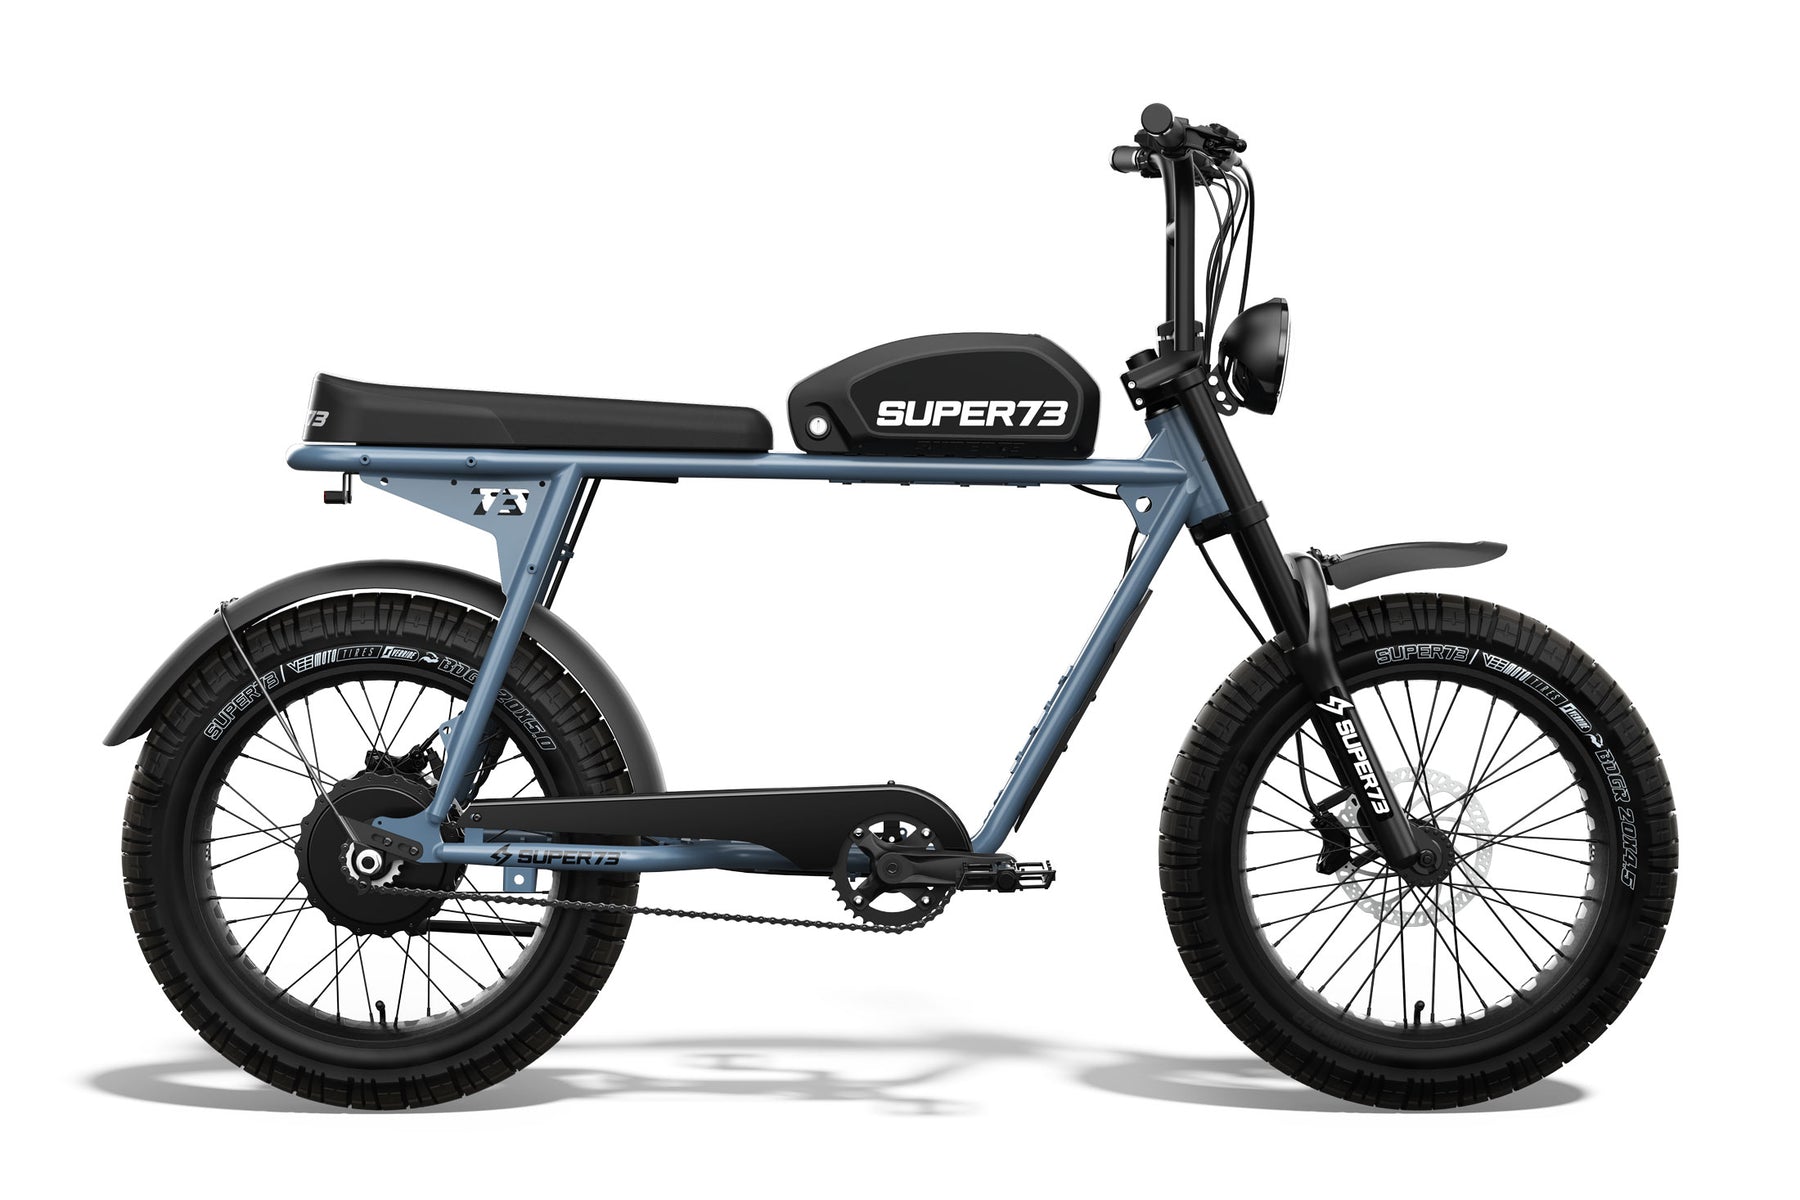 Side view of S2: Panthro Blue, Super73 ebike 